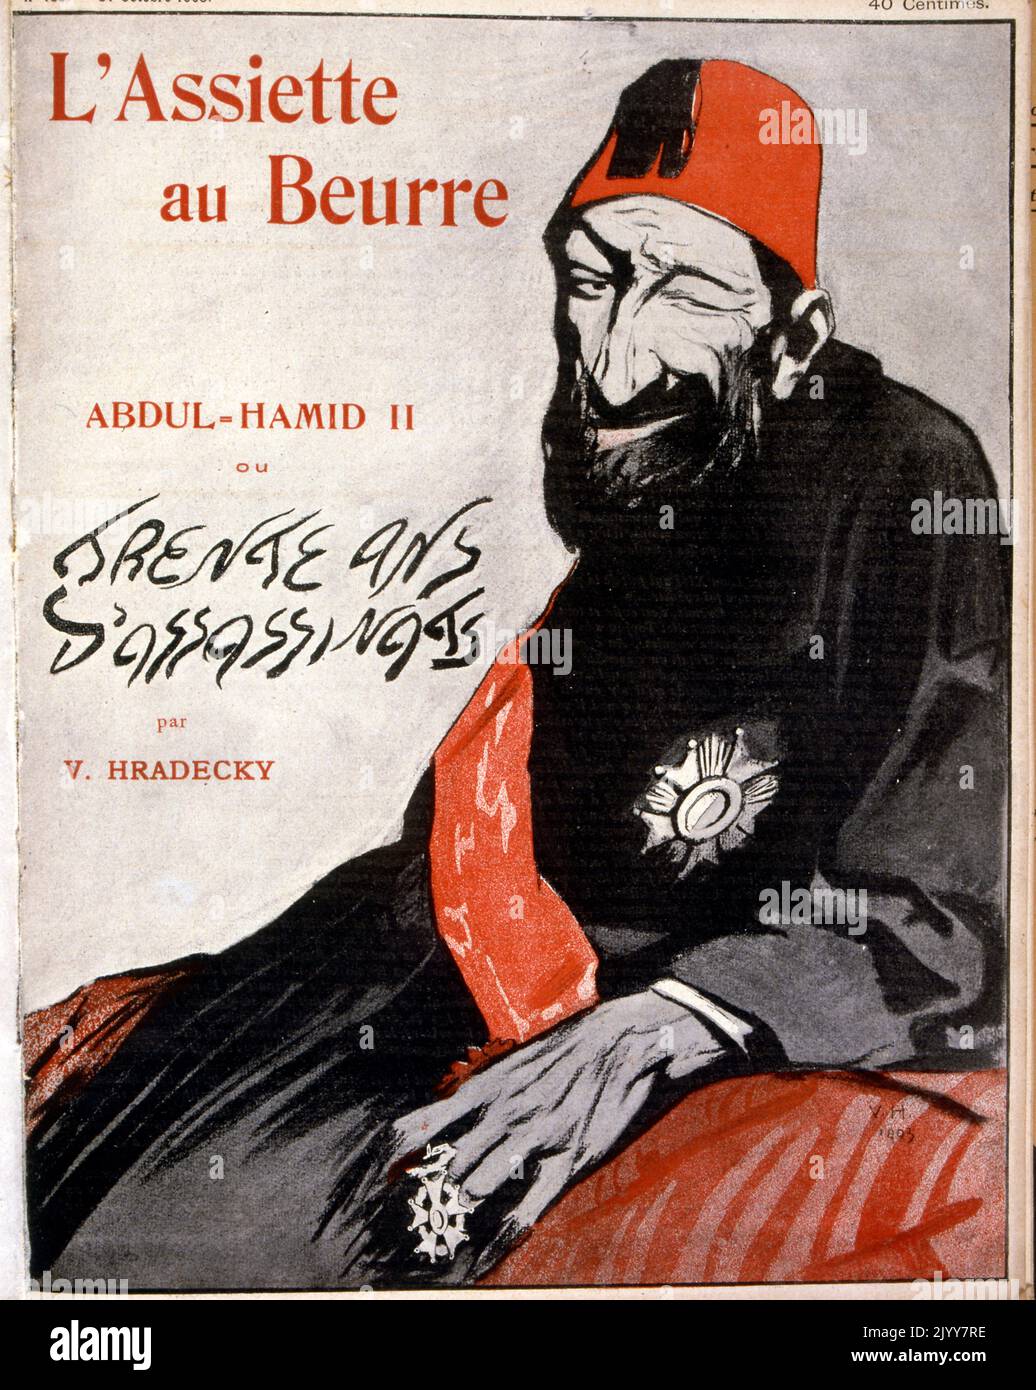 In L'Assiette au Beurre satirical magazine; front cover; edition entitled 'Abdul-Hamid II, or Trente ans d'assassinates', October 1903. Stock Photo